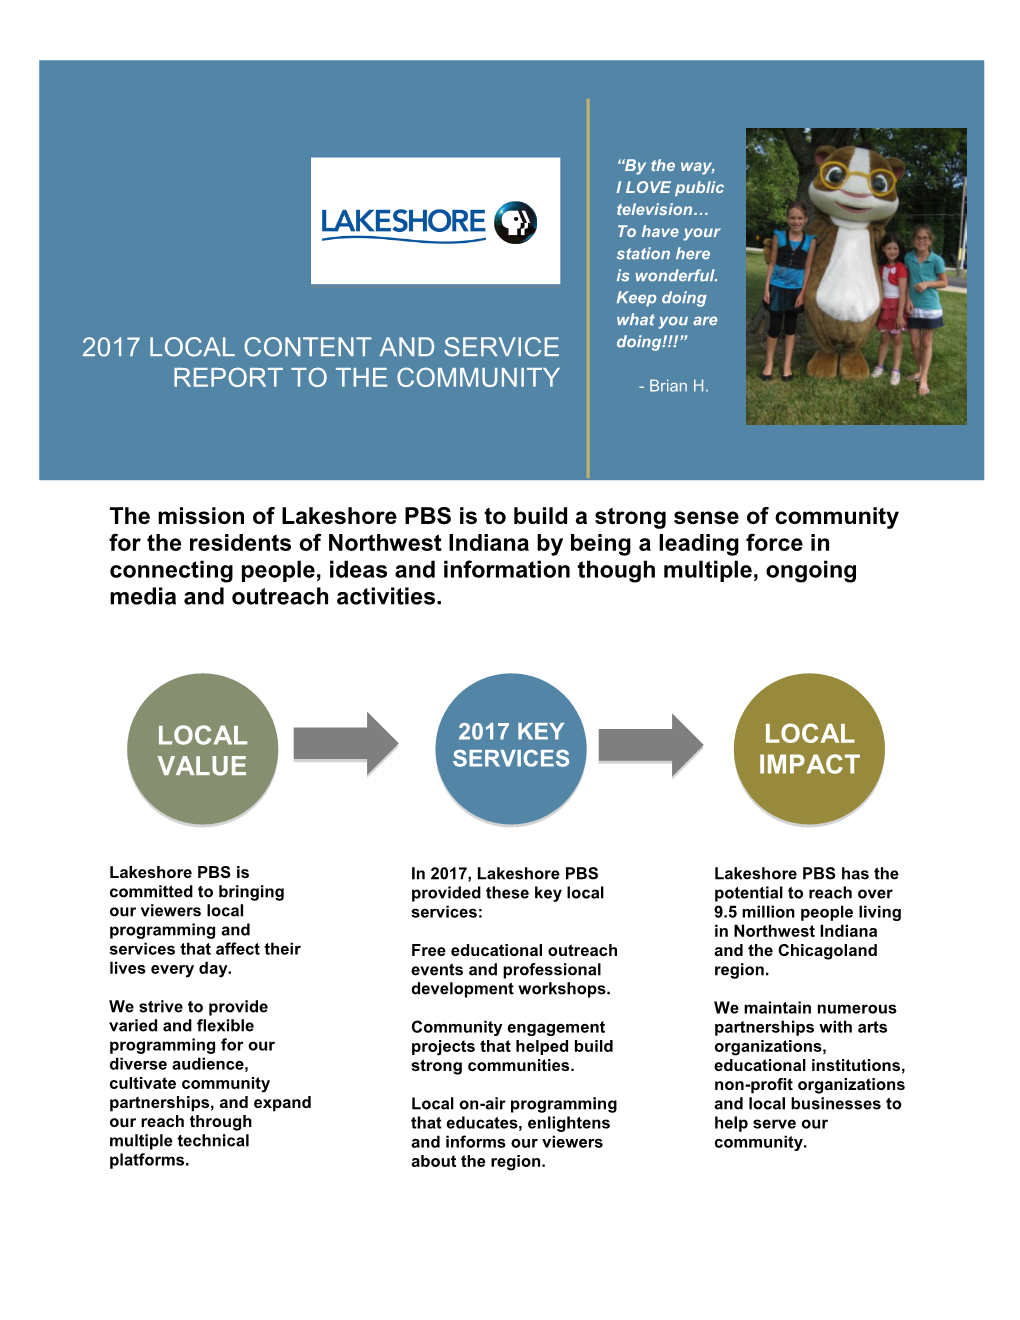 2017 Local Content and Service Report to The